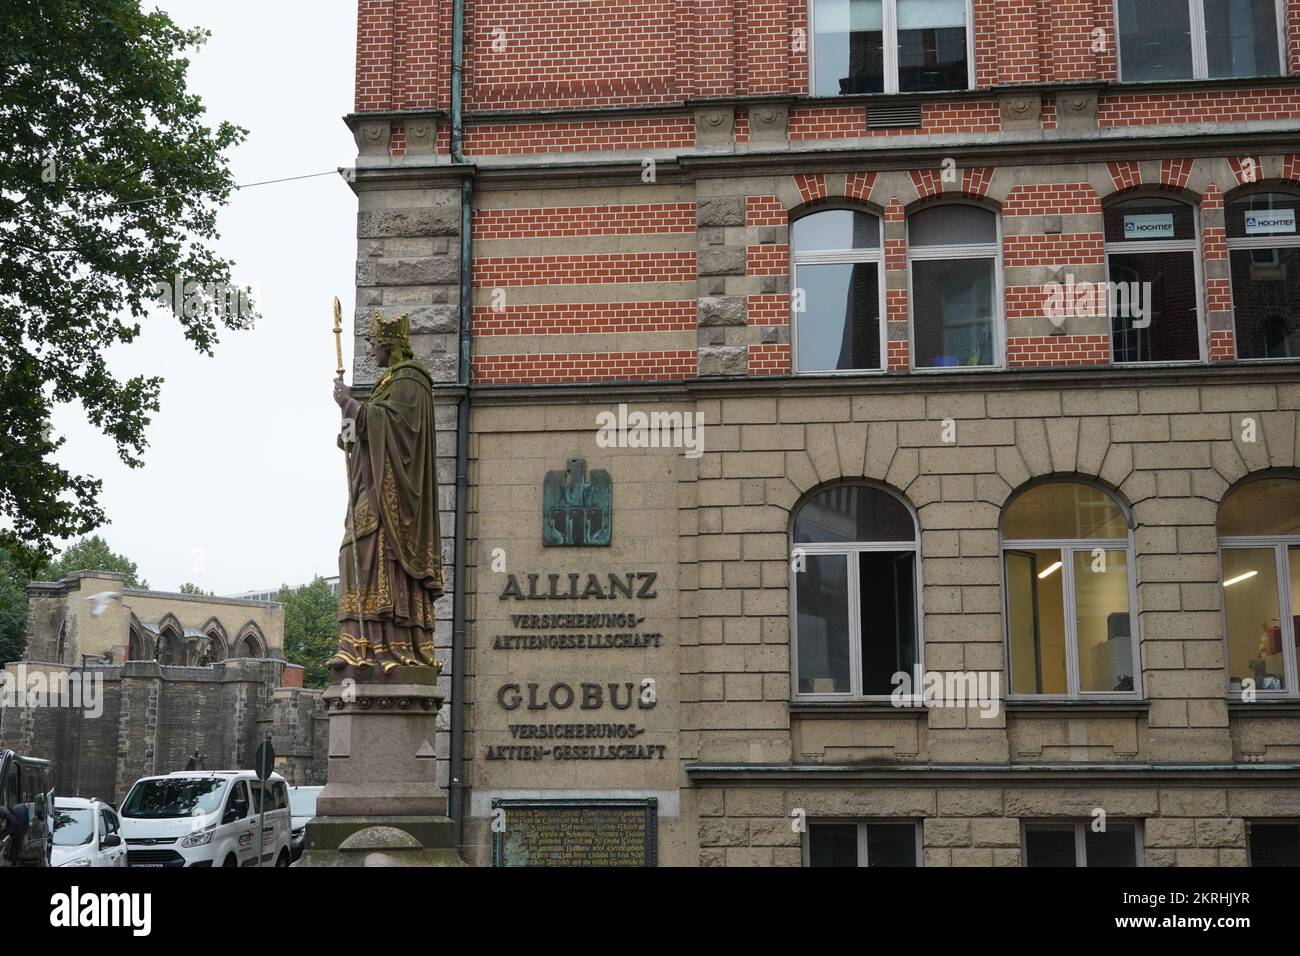 Historic building of Allianz and Globus, both with inscription insurance stock company in German language. Stock Photo